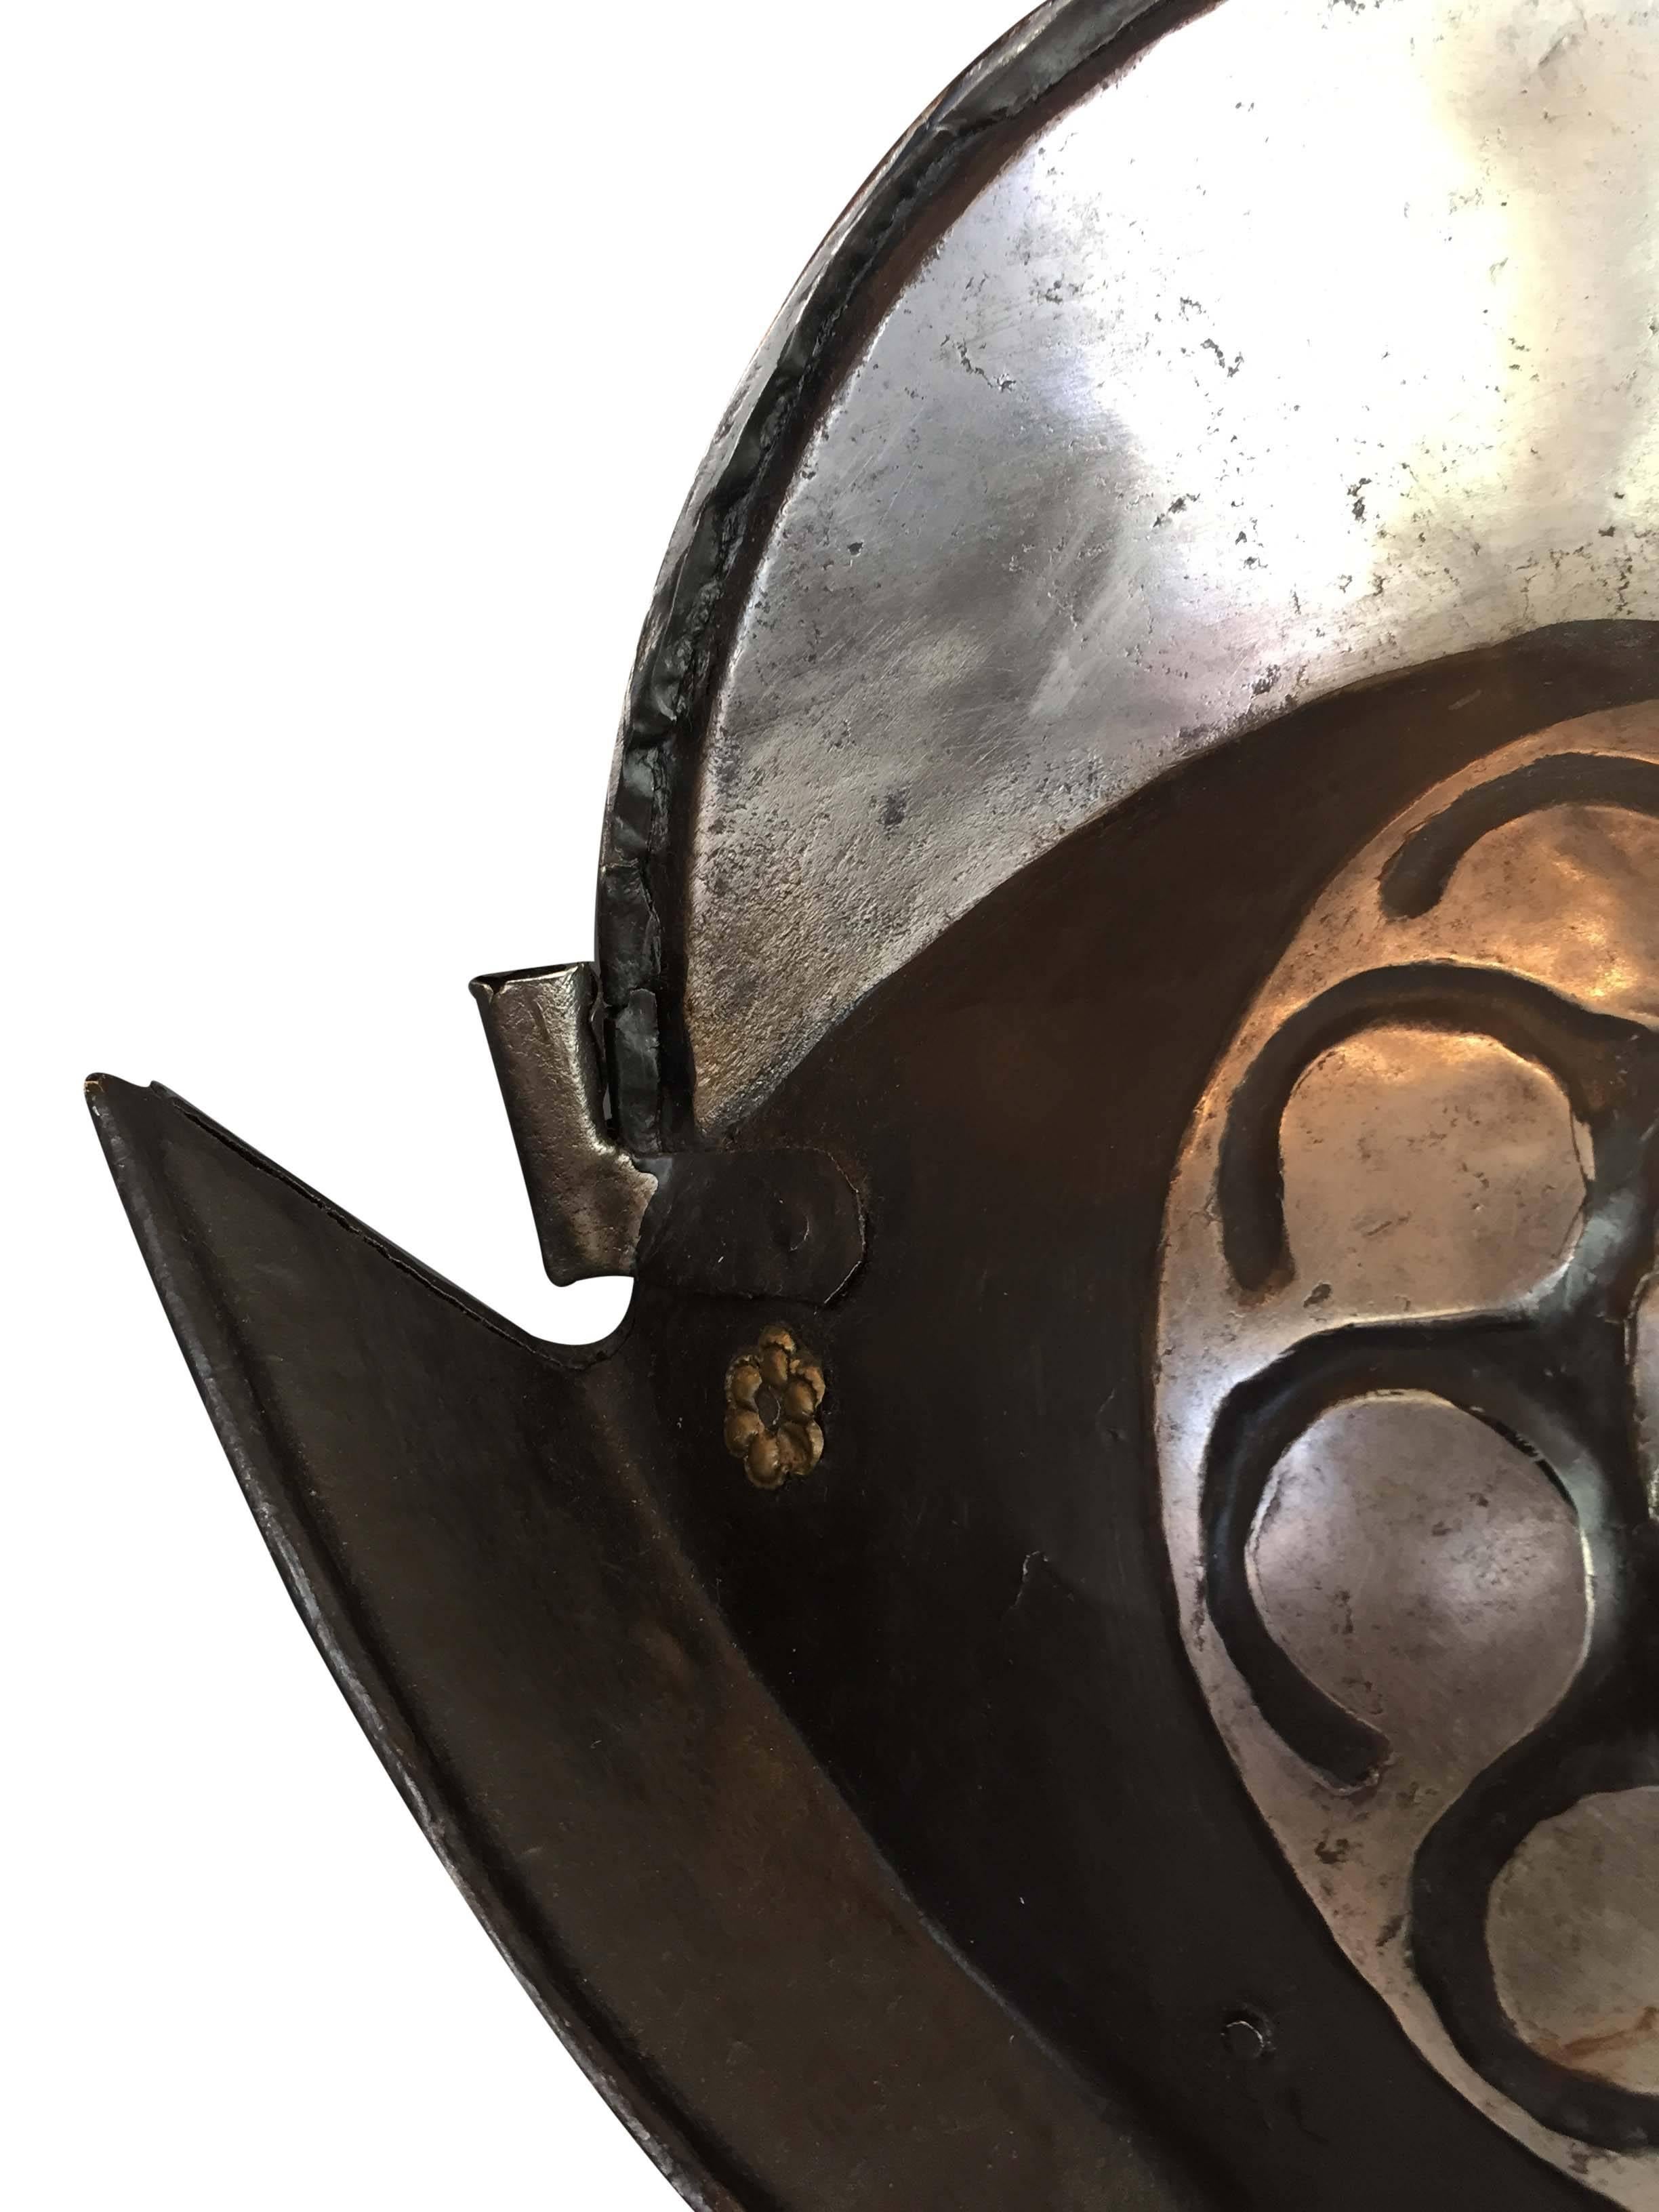 An early 17th century black and white North German comb morion helmet. It features a beautiful hexafoil decoration on each side of the helmet.